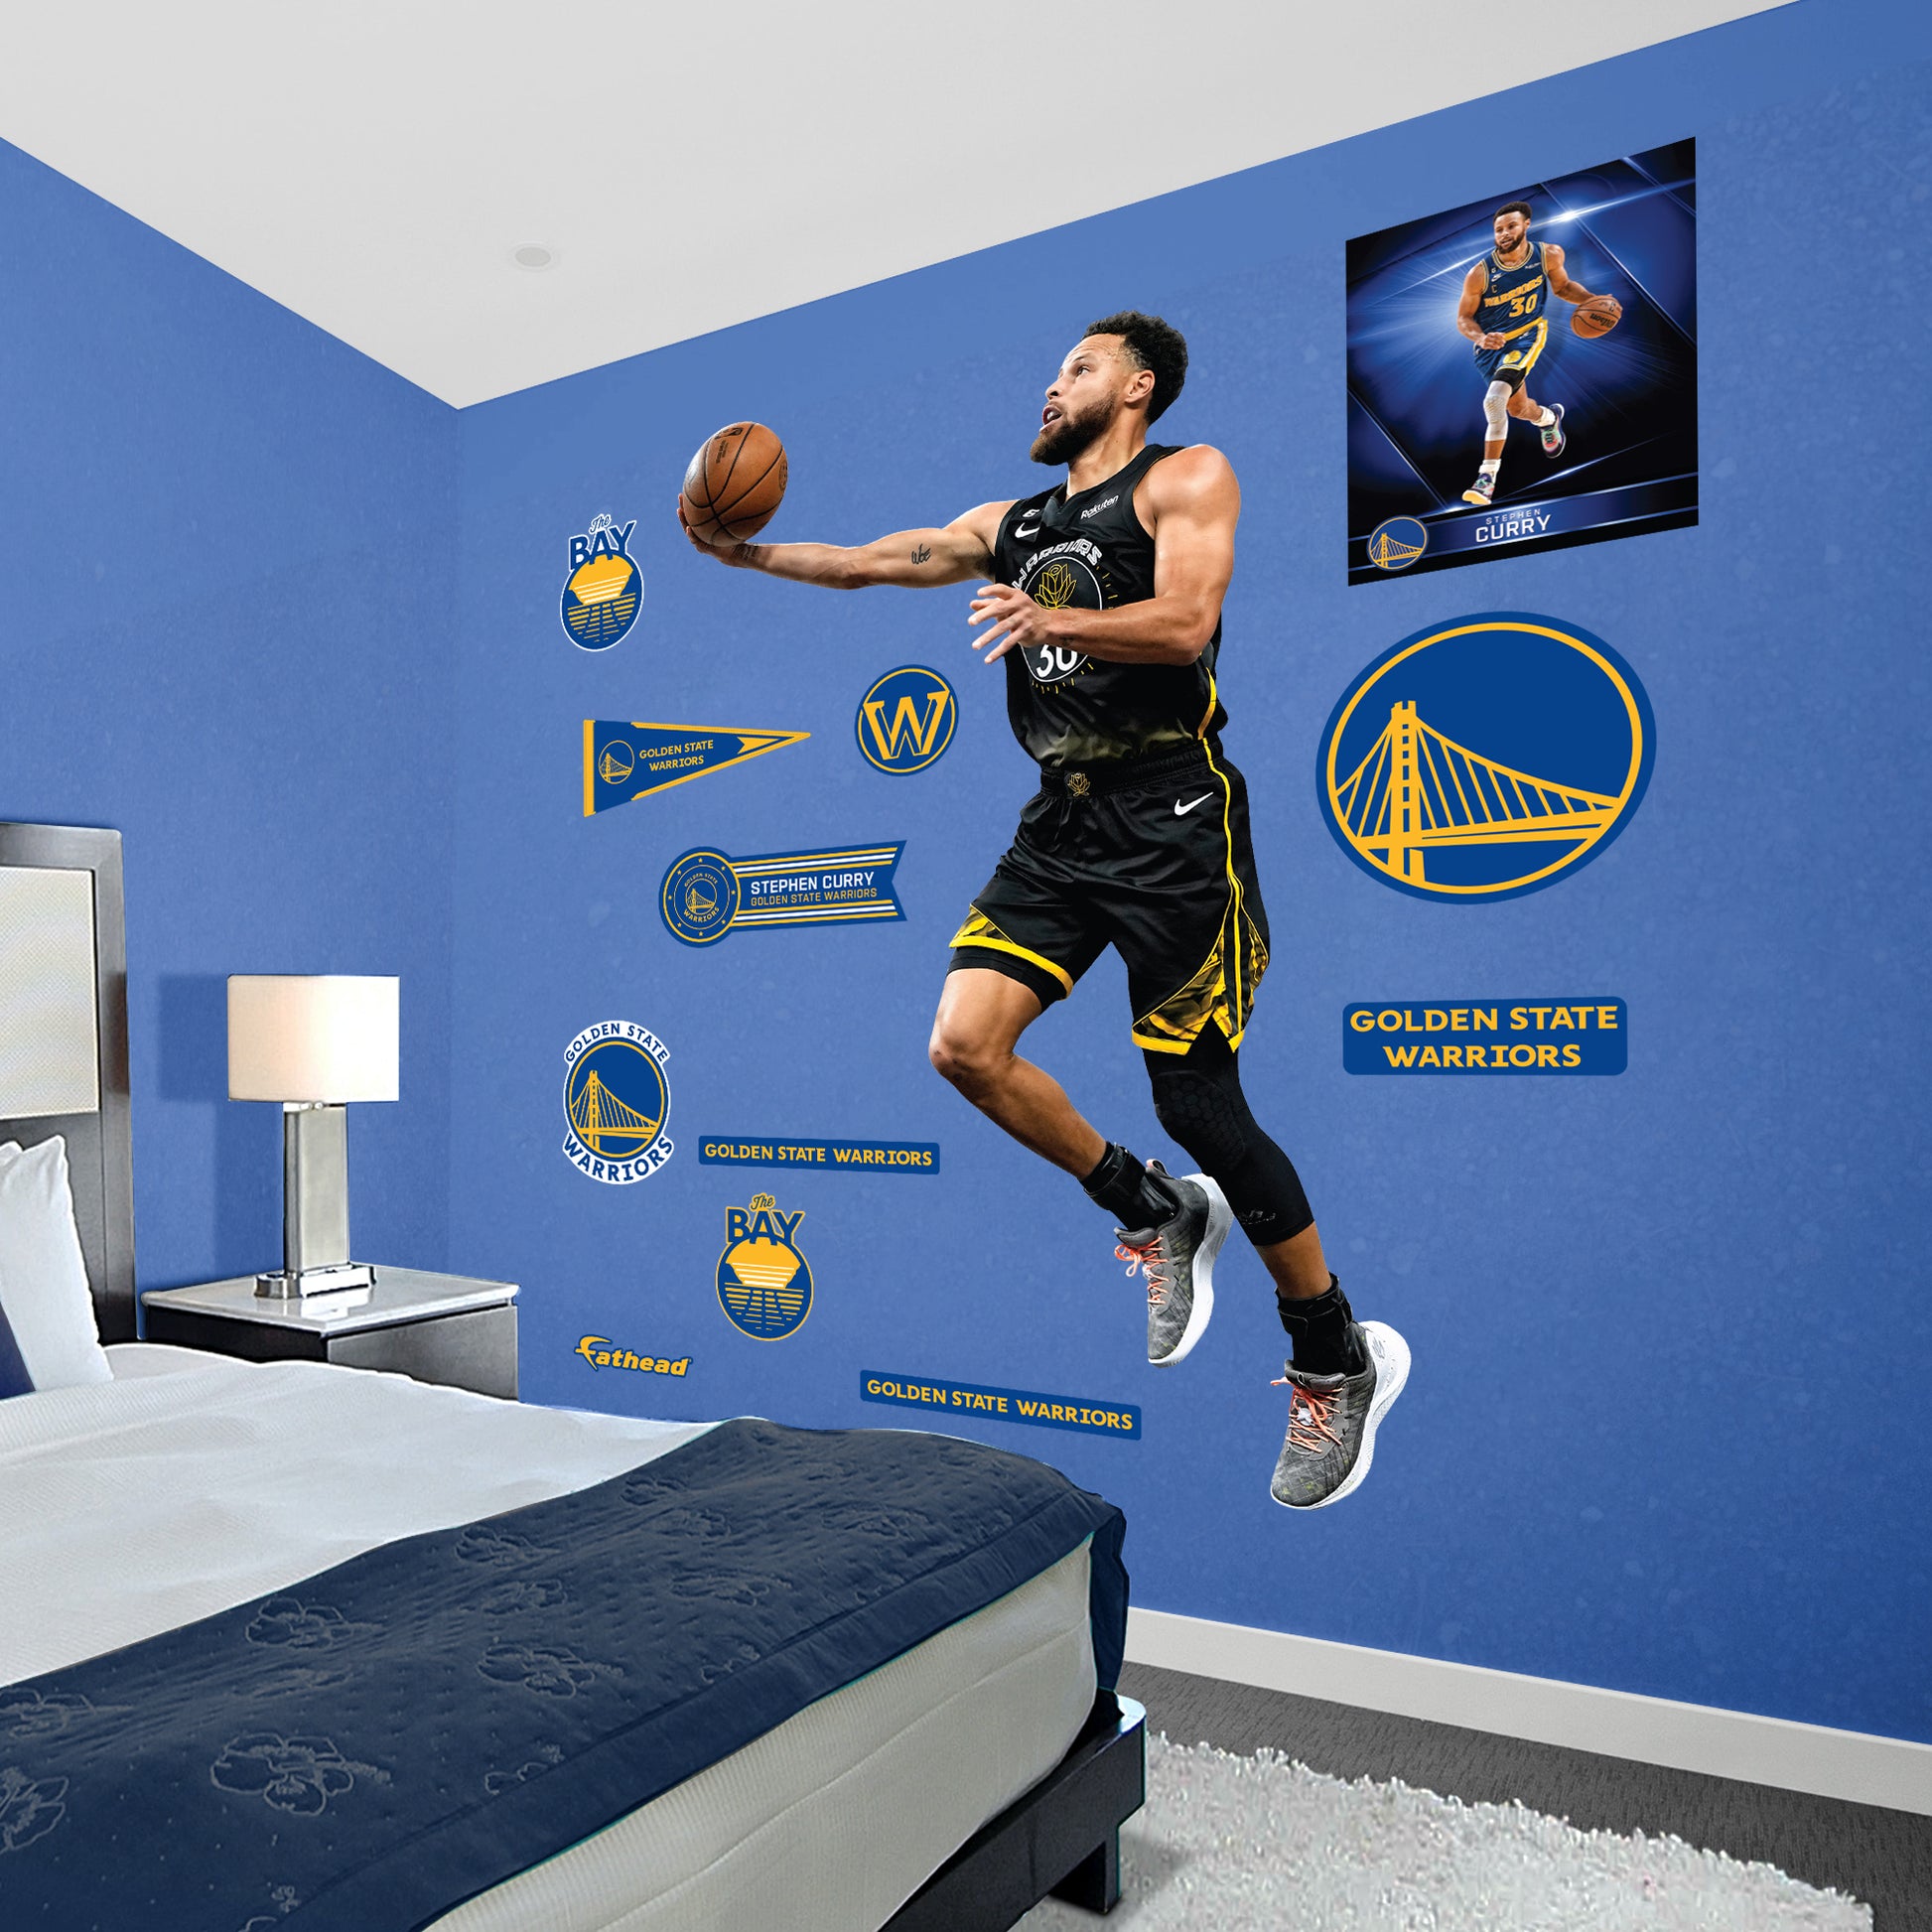 Golden State Warriors: Stephen Curry 2021 Black Jersey - NBA Removable Adhesive Wall Decal Life-Size Athlete +2 Wall Decals 34W x 78H